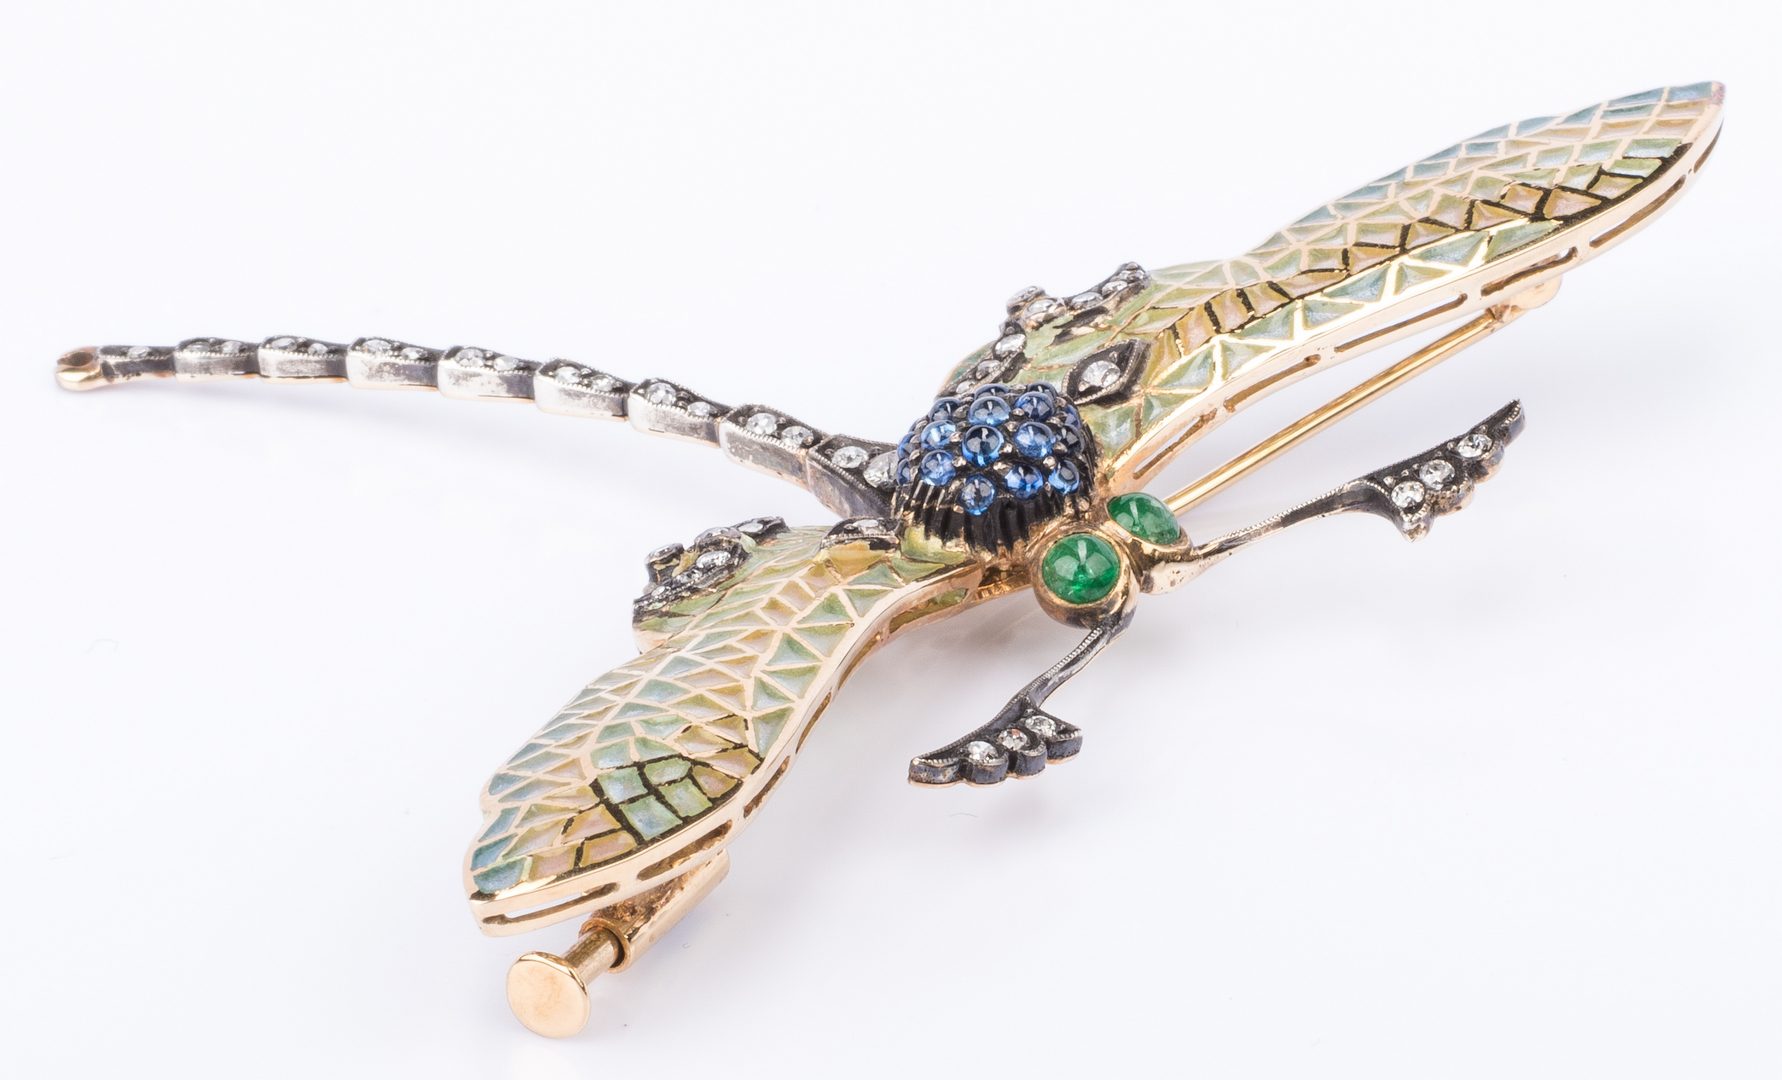 Lot 207: Jeweled Dragonfly Pin with Enamel